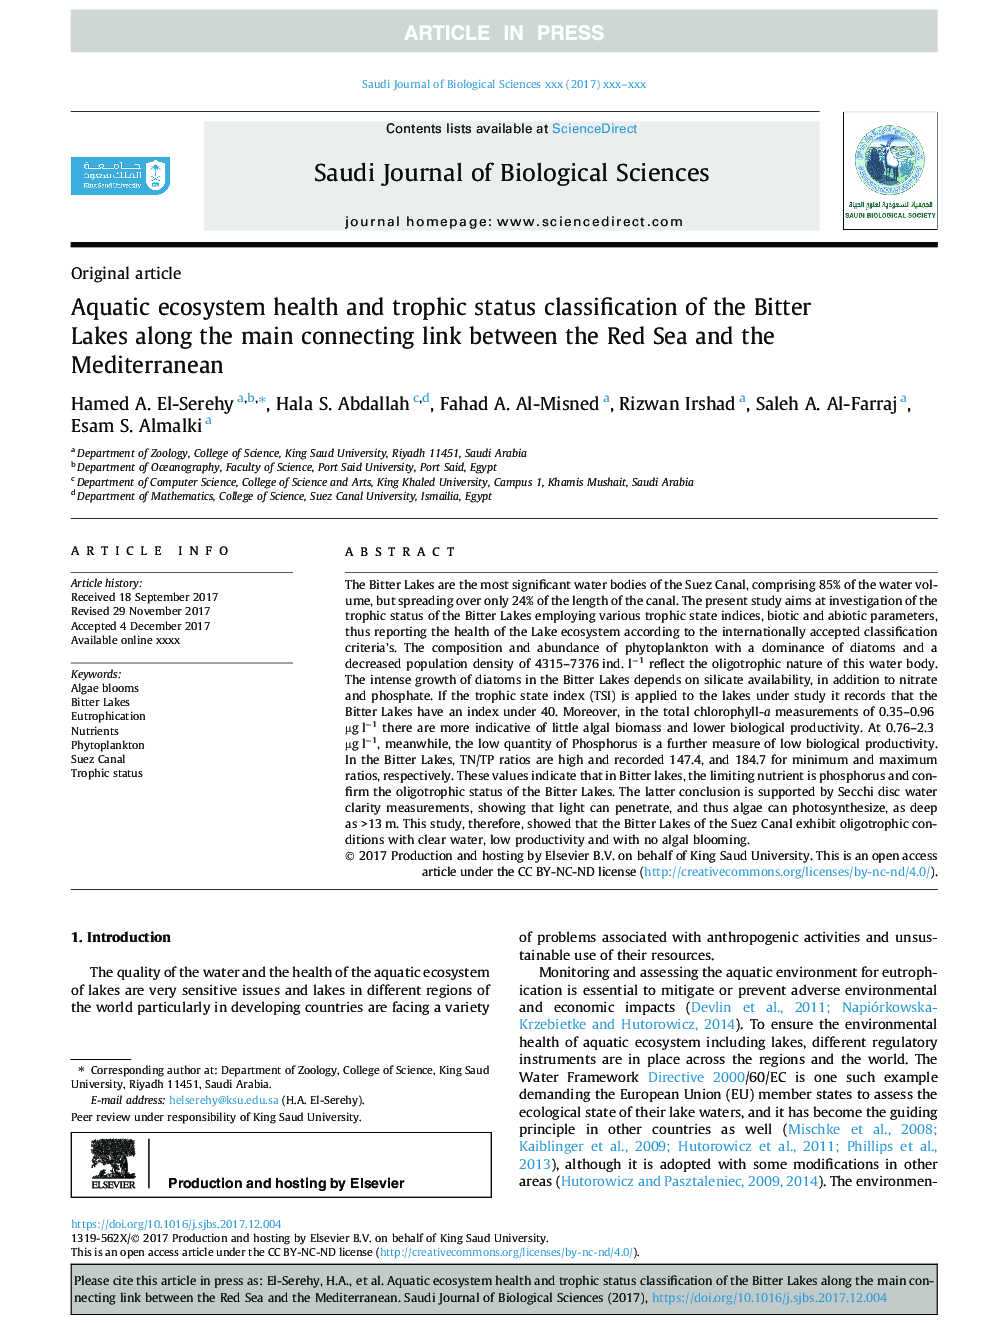 Aquatic ecosystem health and trophic status classification of the Bitter Lakes along the main connecting link between the Red Sea and the Mediterranean